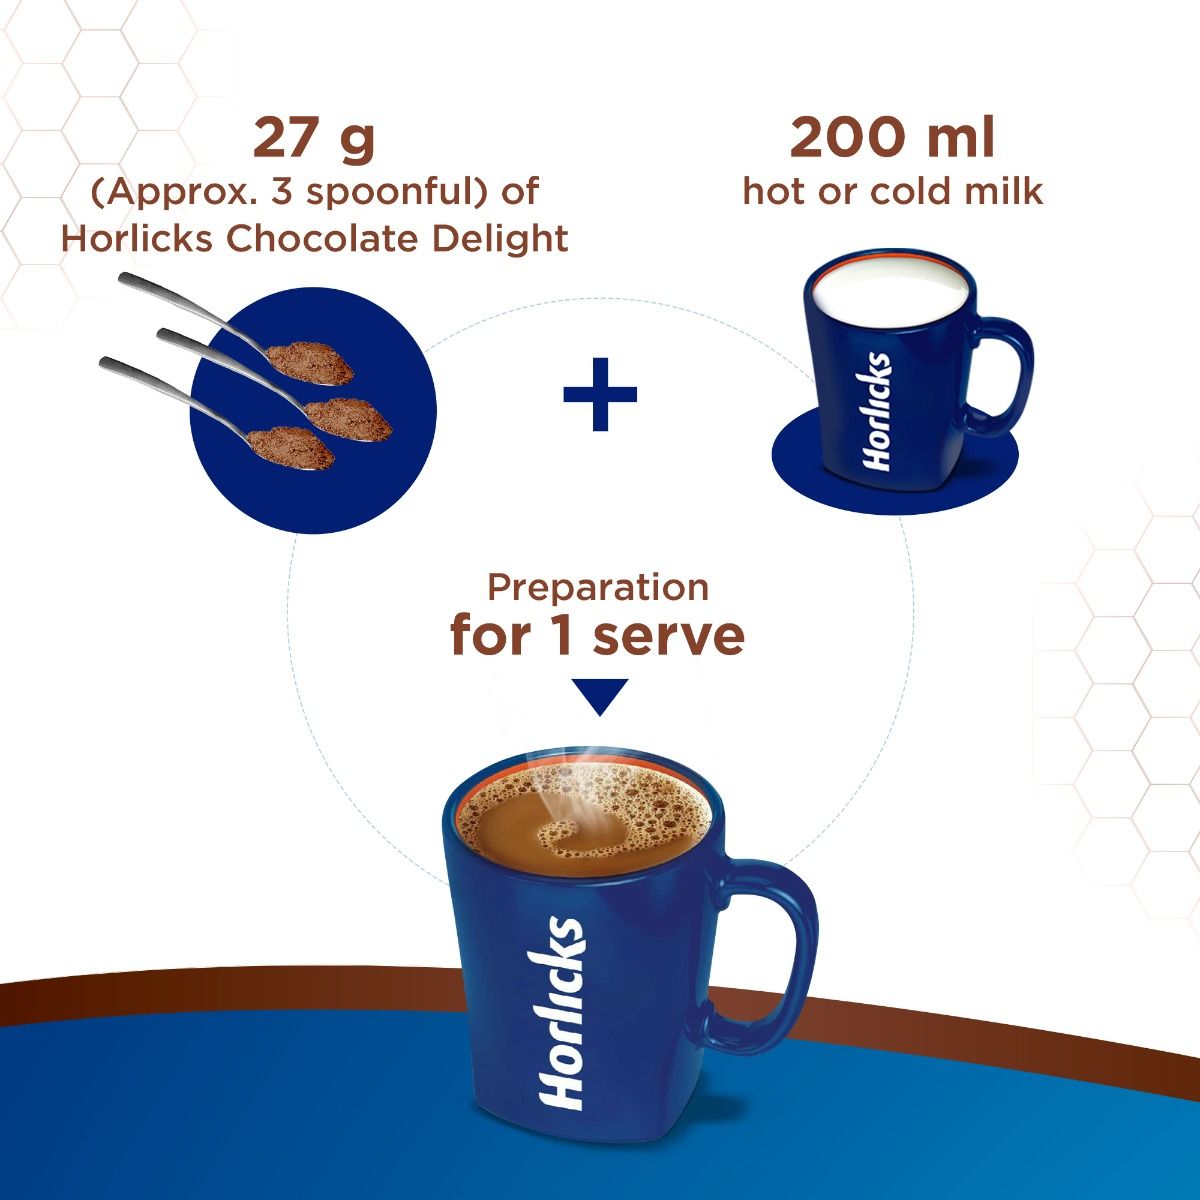 Horlicks Chocolate Delight Flavour Health & Nutrition Drink, 750 gm Refill Pack, Pack of 1 